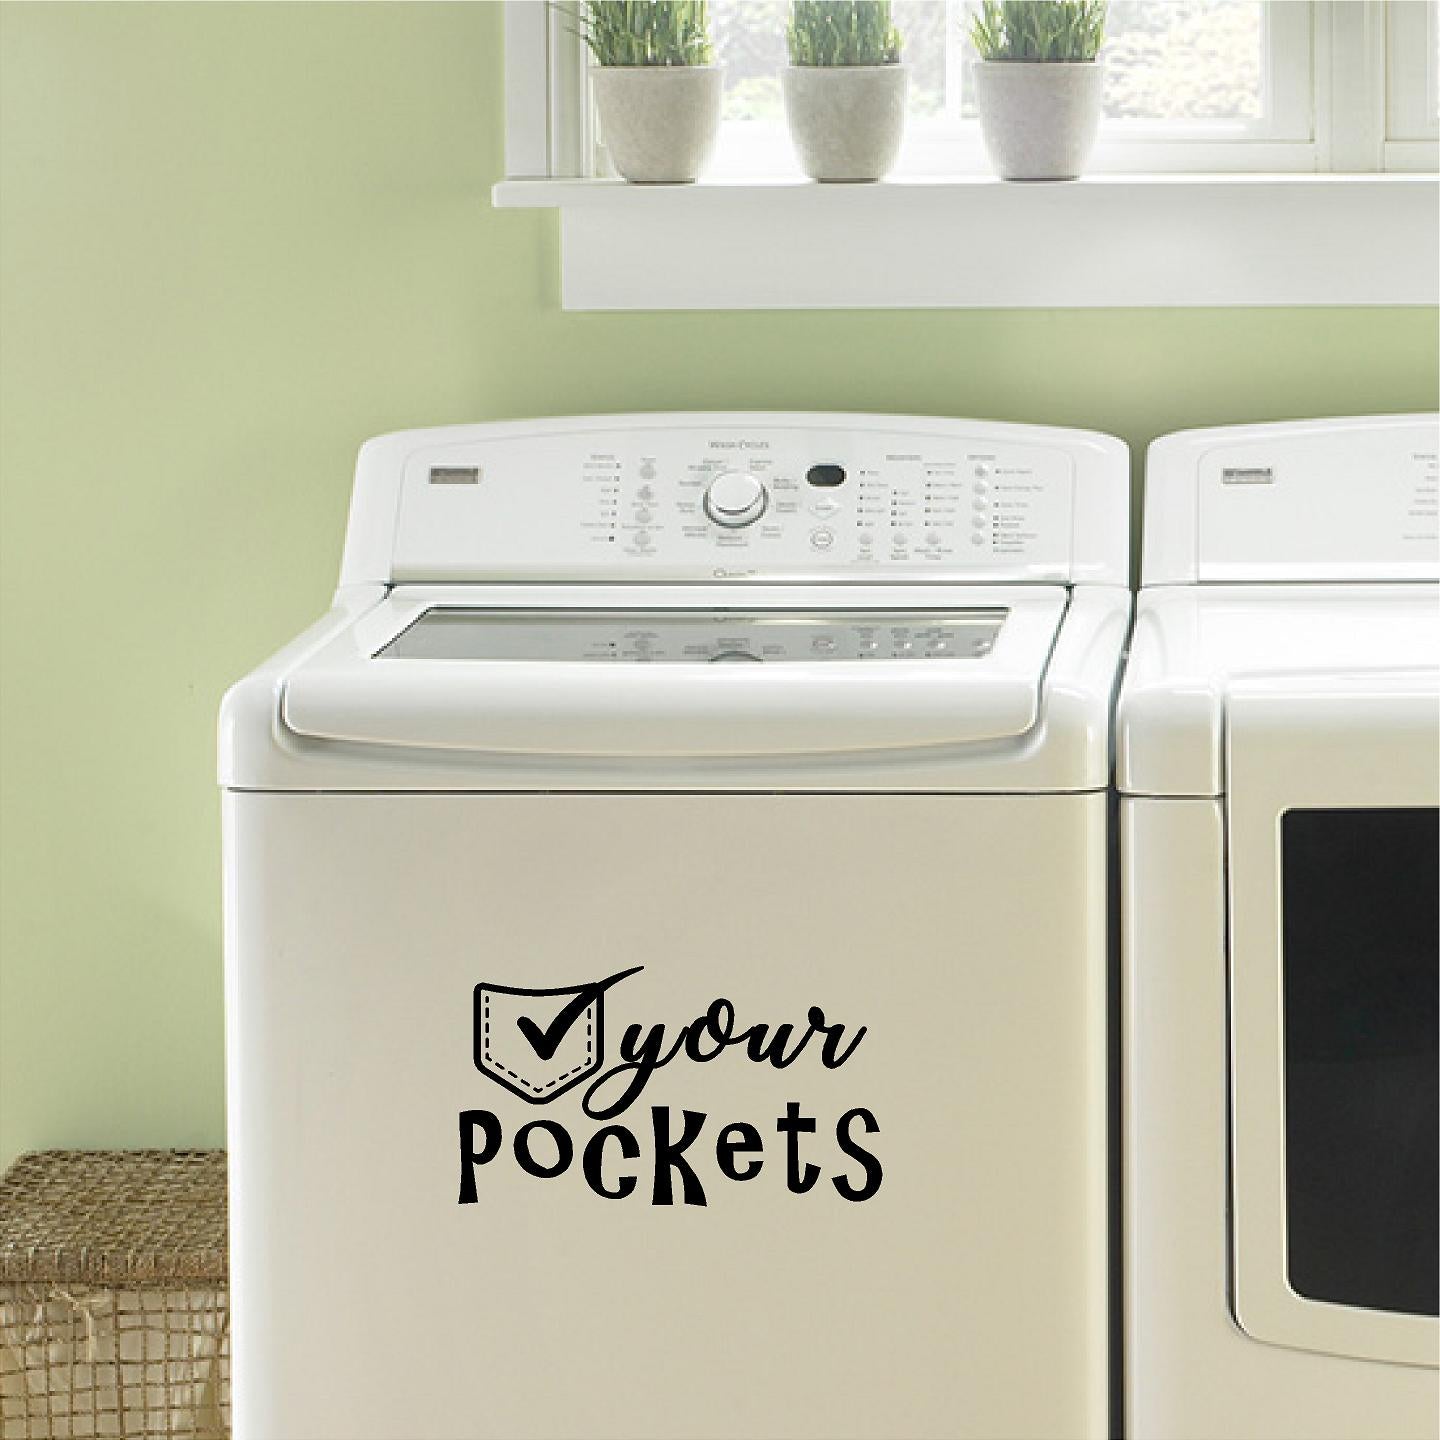 Stickers. Vinyl Wall Decal. Laundry Room Decor. Check Your Pocket Decal.